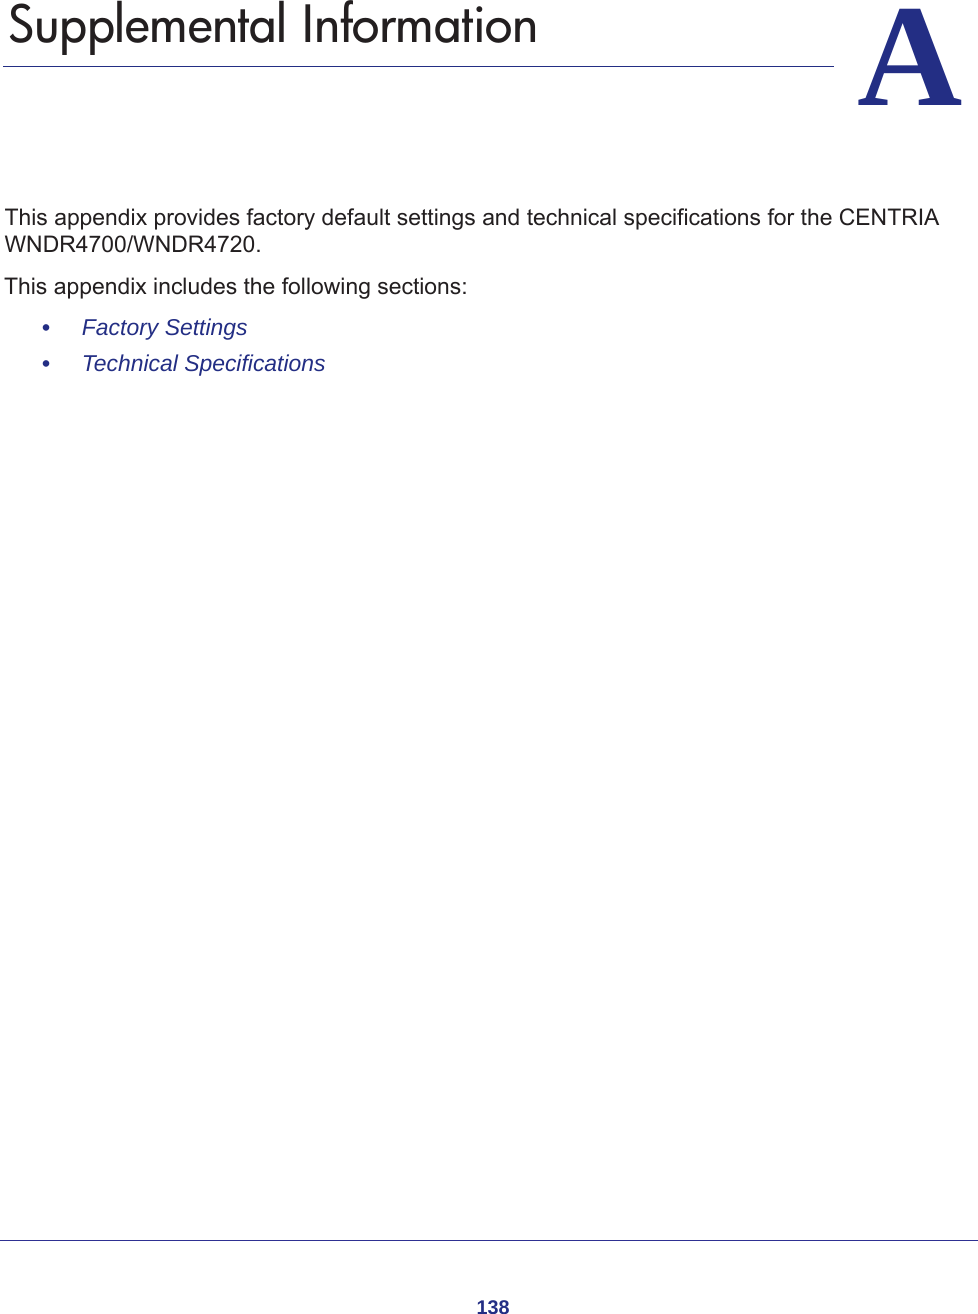 138AA.   Supplemental InformationThis appendix provides factory default settings and technical specifications for the CENTRIA WNDR4700/WNDR4720.This appendix includes the following sections:•     Factory Settings •     Technical Specifications 